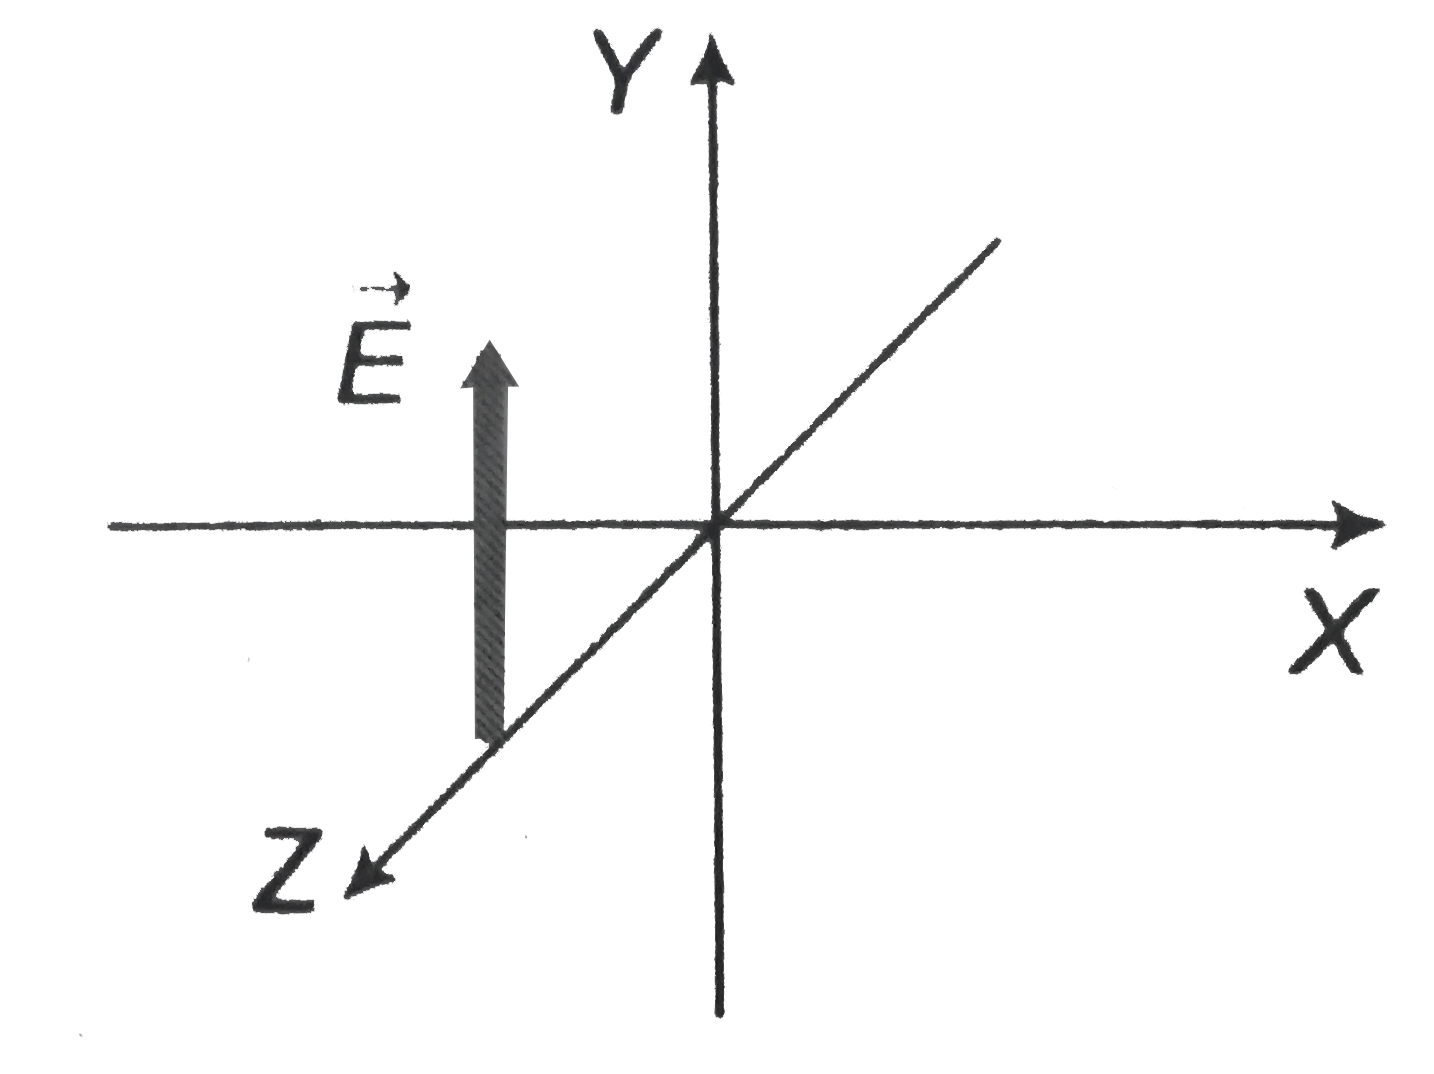 The figure here gives the electric field of an EM wave at a certain point and a certain. The wave is transporting energy in the negative z direction. What is the direction of the magnetic field of the wave at the point and instant?